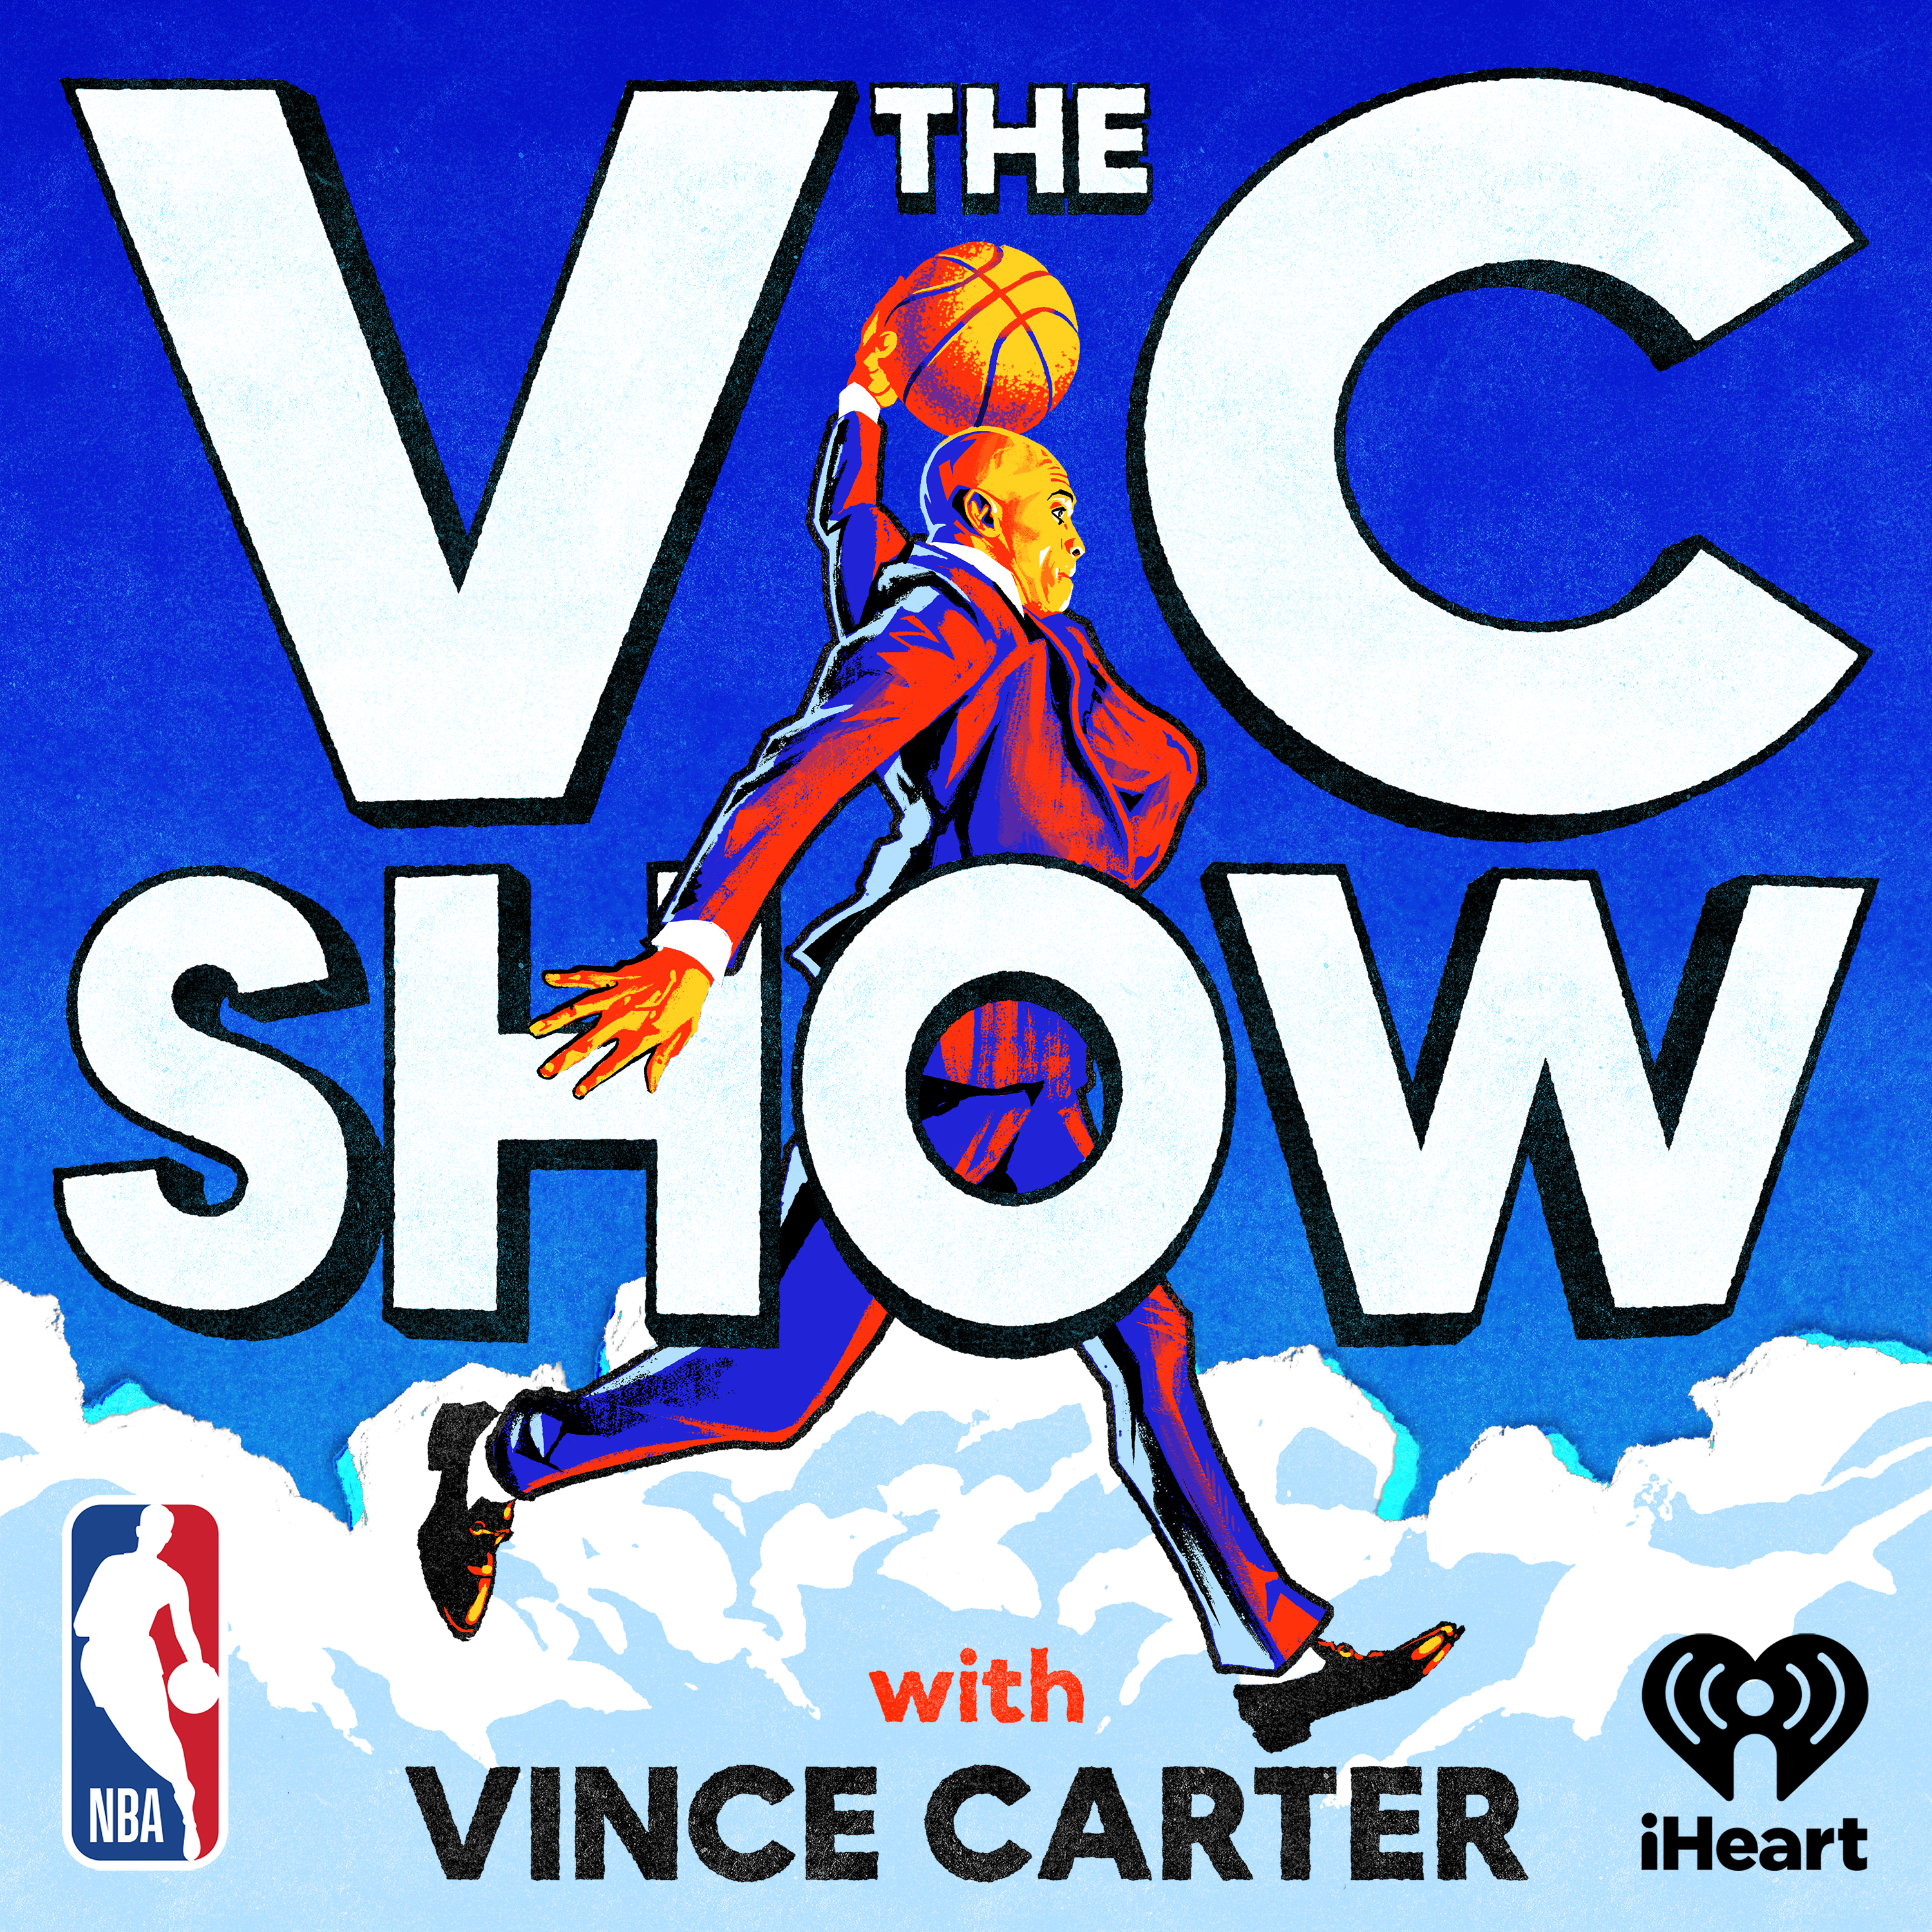 Kobe’s retirement advice to Vince, LeBron’s place in the GOAT conversation & why superstars don’t compete in the dunk contest | The VC Show